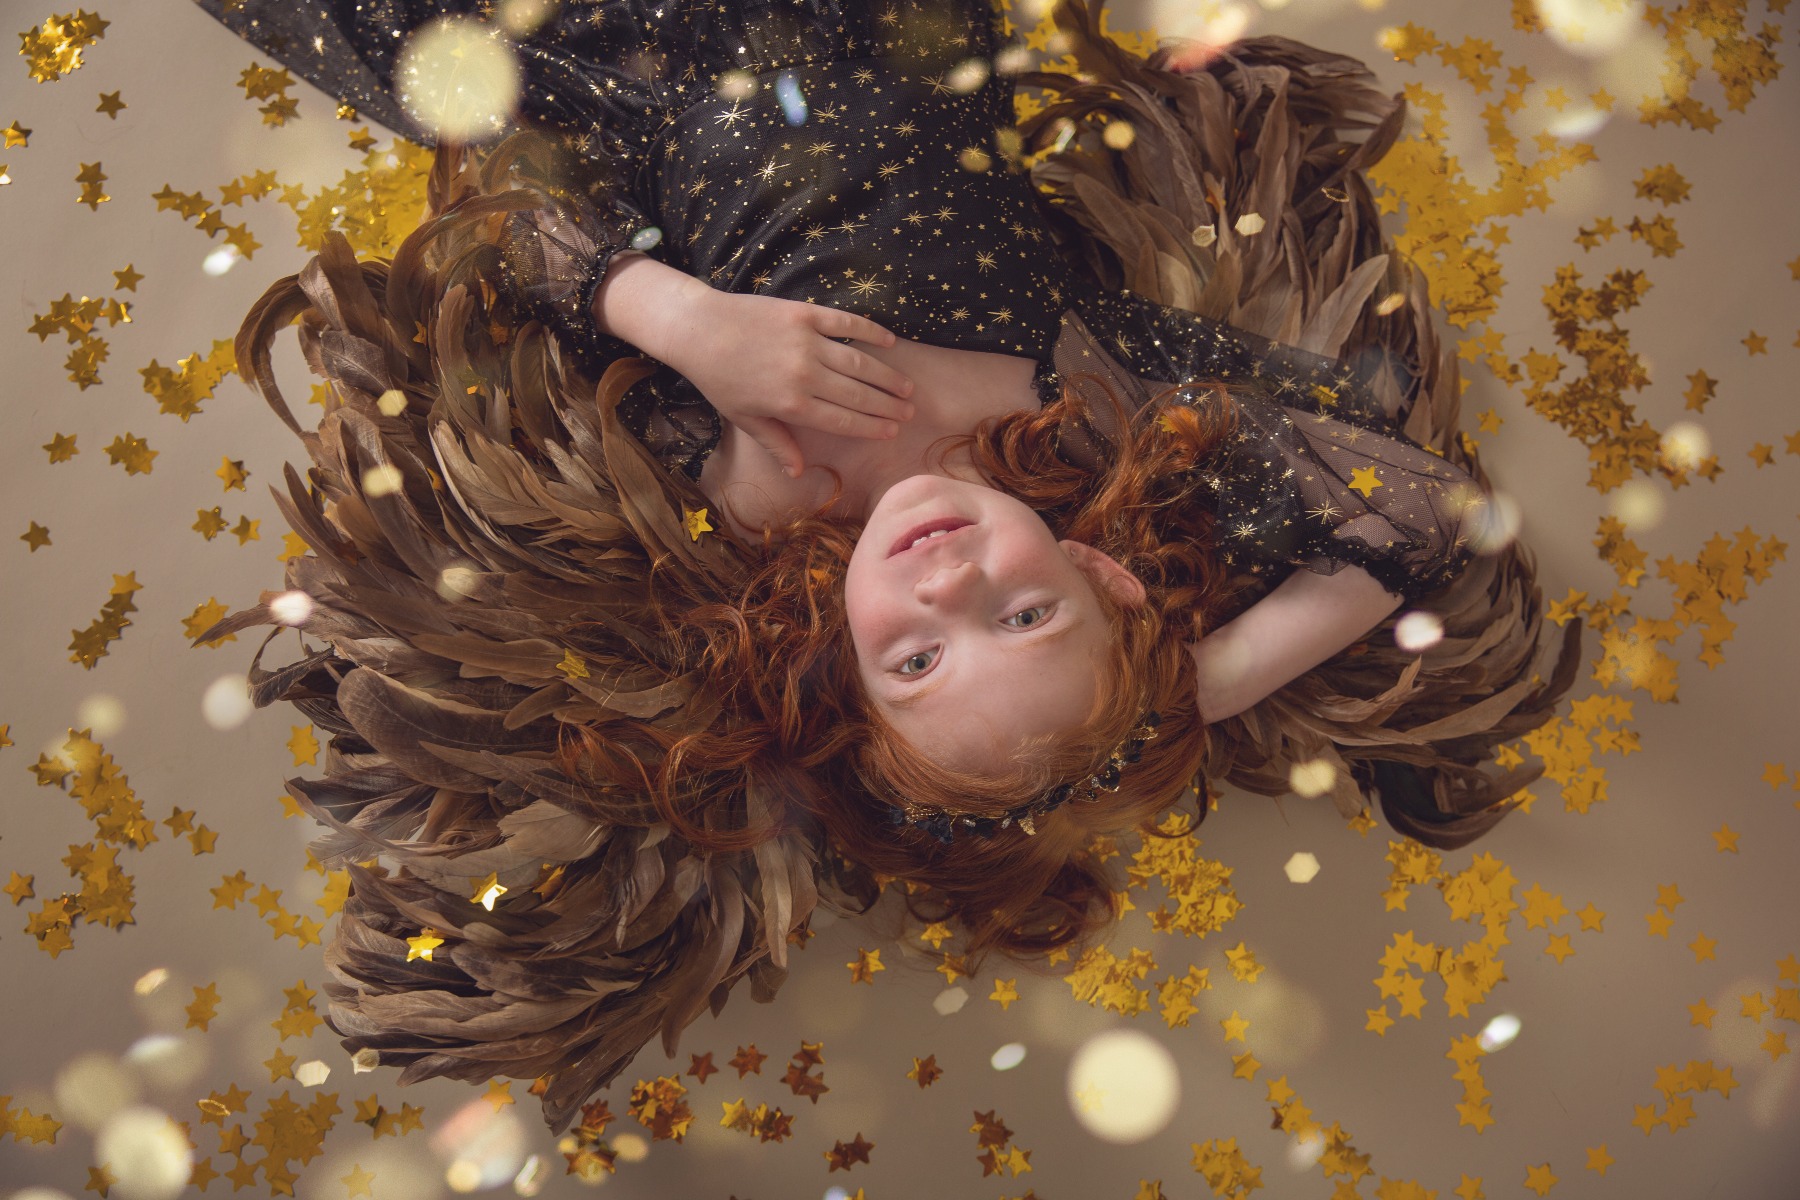 red headed girl with brown angel wings lays amongst a shower of gold confetti